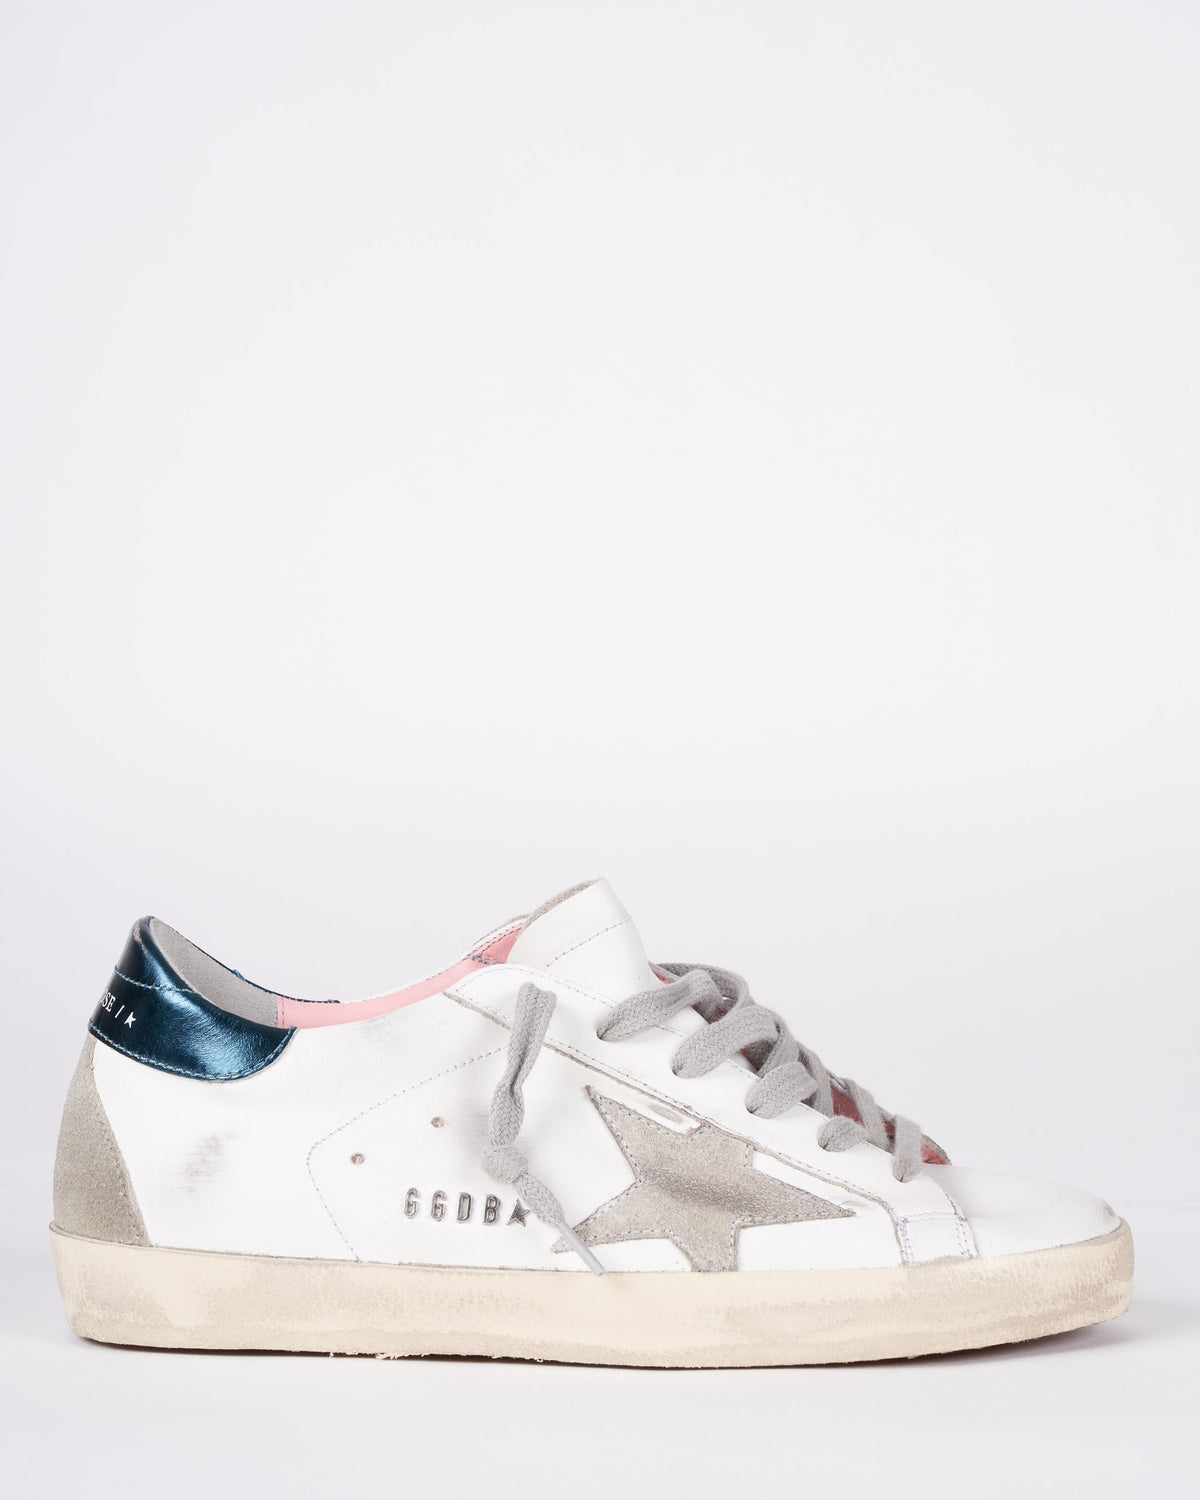 Golden Goose Deluxe Brand Sneakers Super Star White/Ice/Petroleum Soho-Boutique